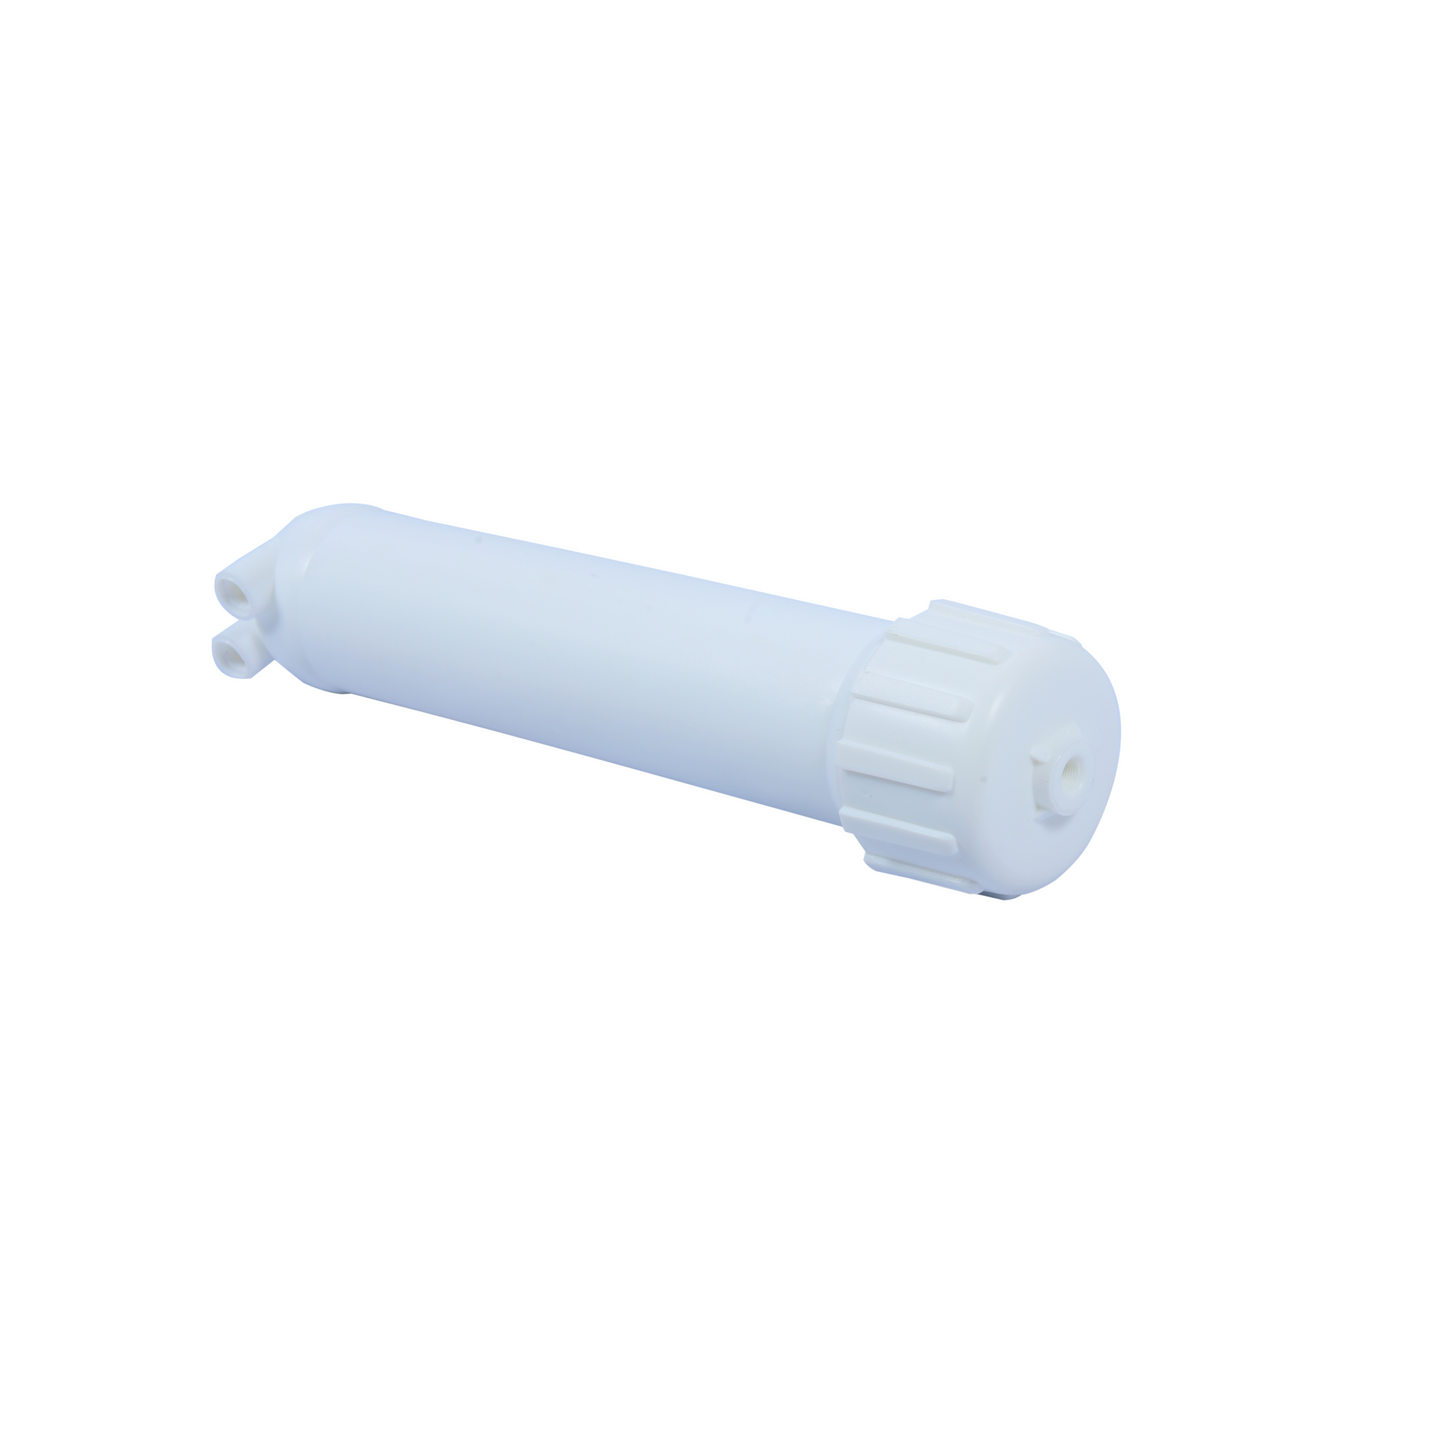 RO-75G-1 RO-Pure 75 GPD Membrane Works Up To 2000 TDS | RO spare parts